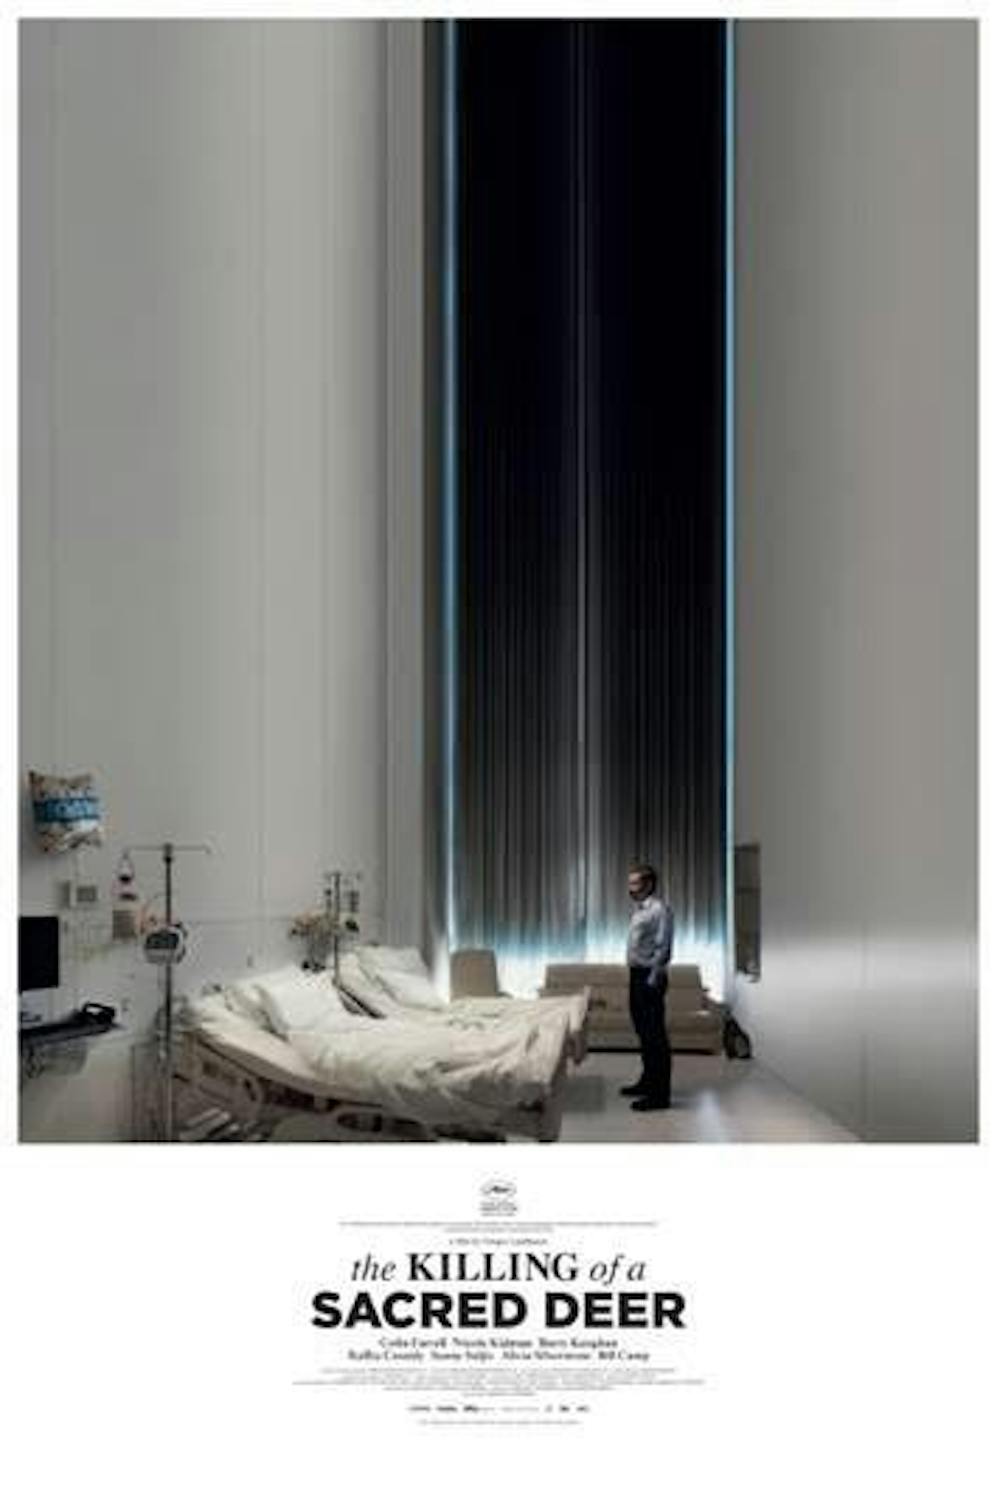 A disturbing picture of guilt: ‘The Killing of a Sacred Deer’ startles and unsettles